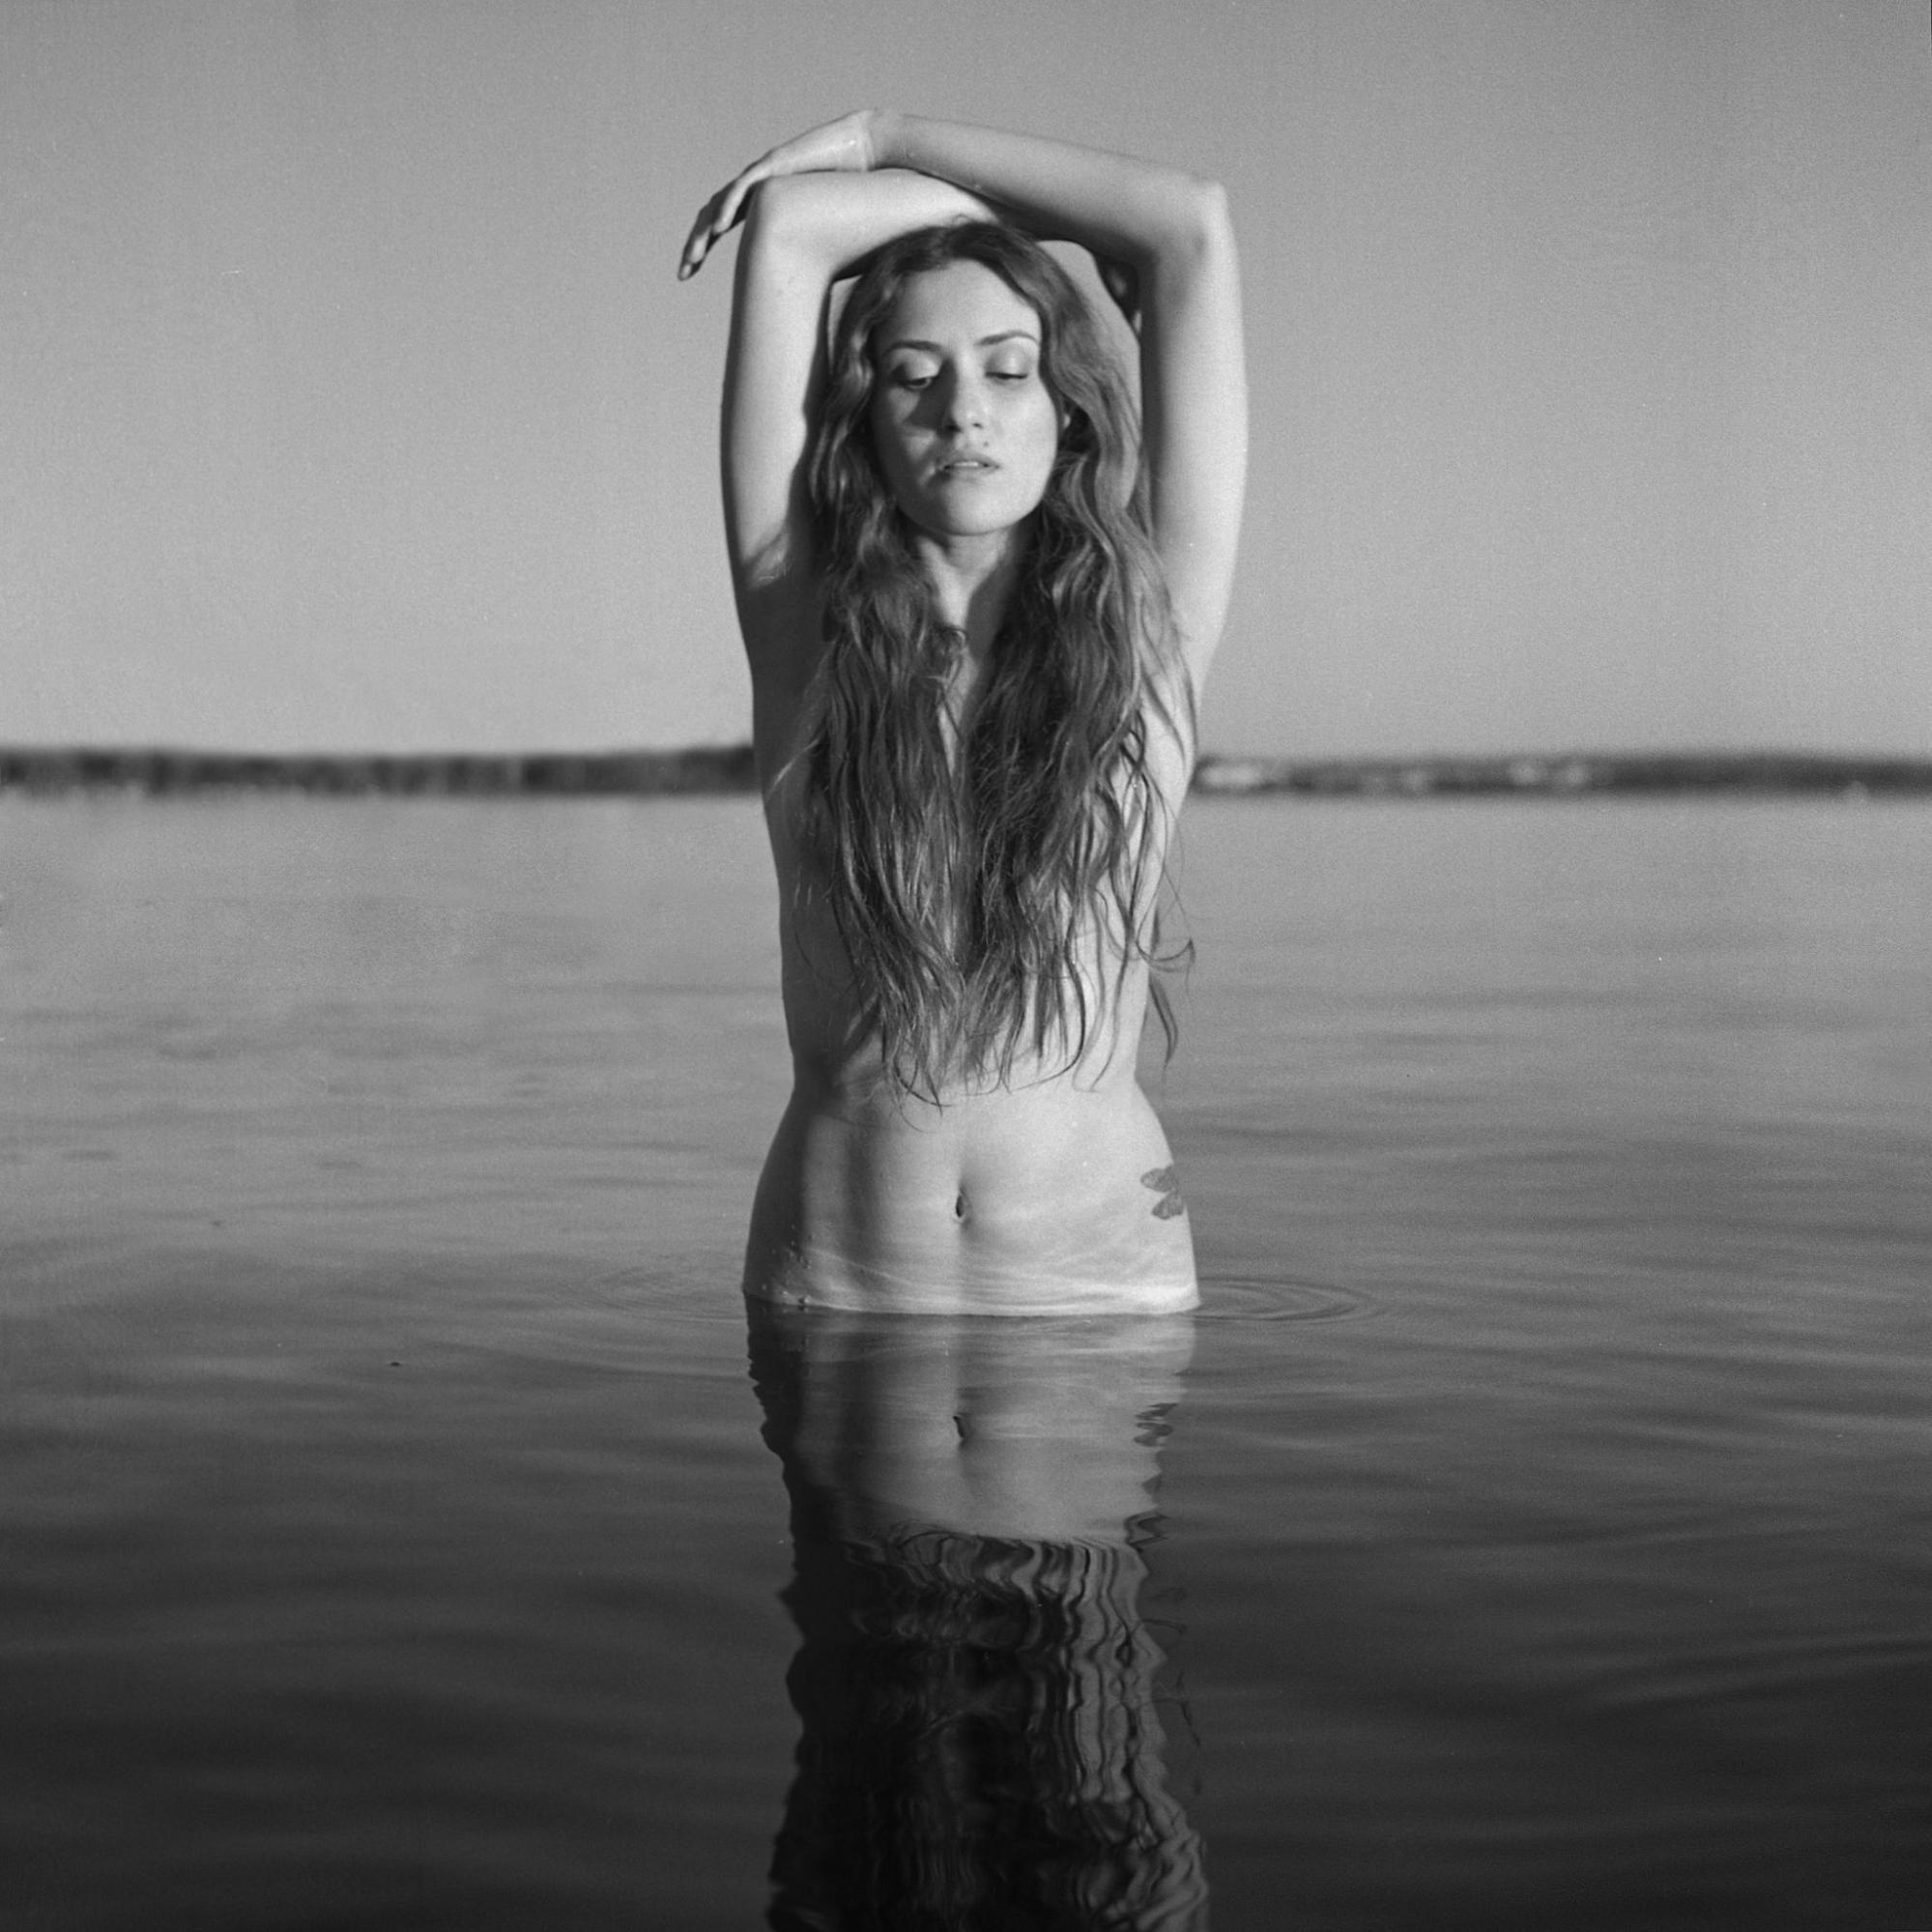 “The Birth Of Venus”, Body of Water series, 2020. Ilford Hp5+ 400, Yashica Mat 124g. by Clara Anaujo for In Focus